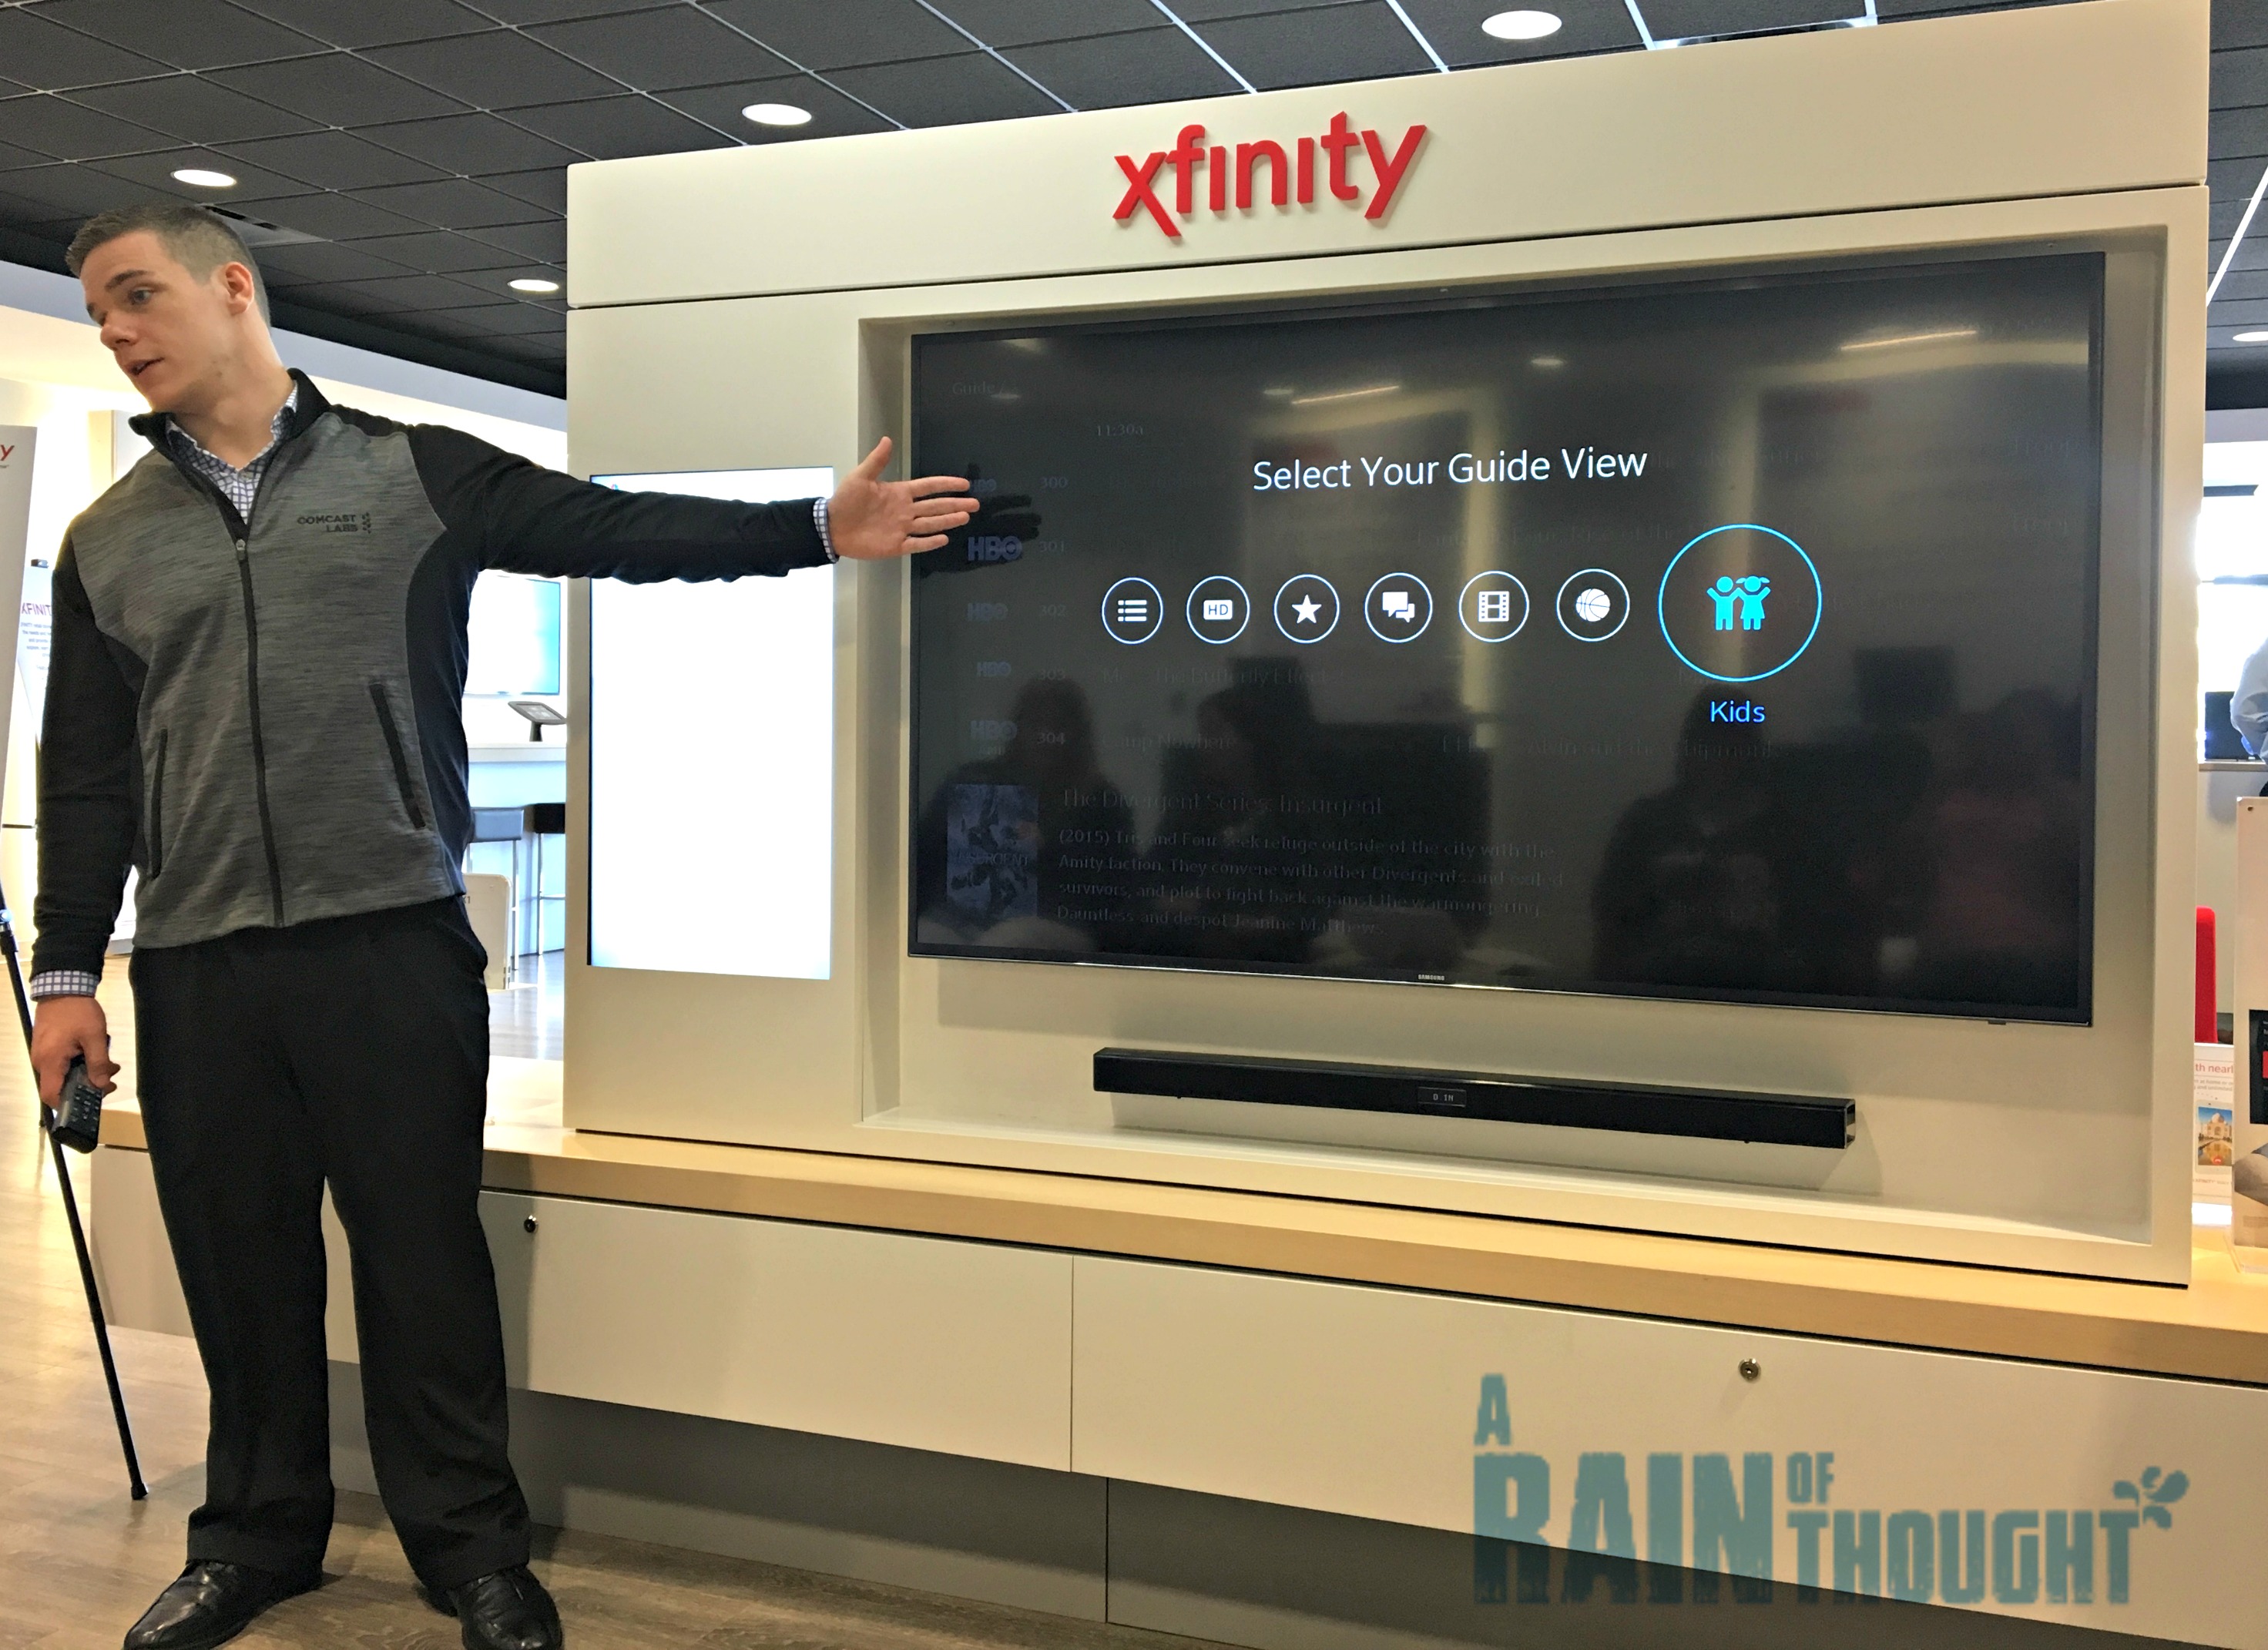 #XfinityMoms, Xfinity Home, Comcast, X1, New Jersey, cable television